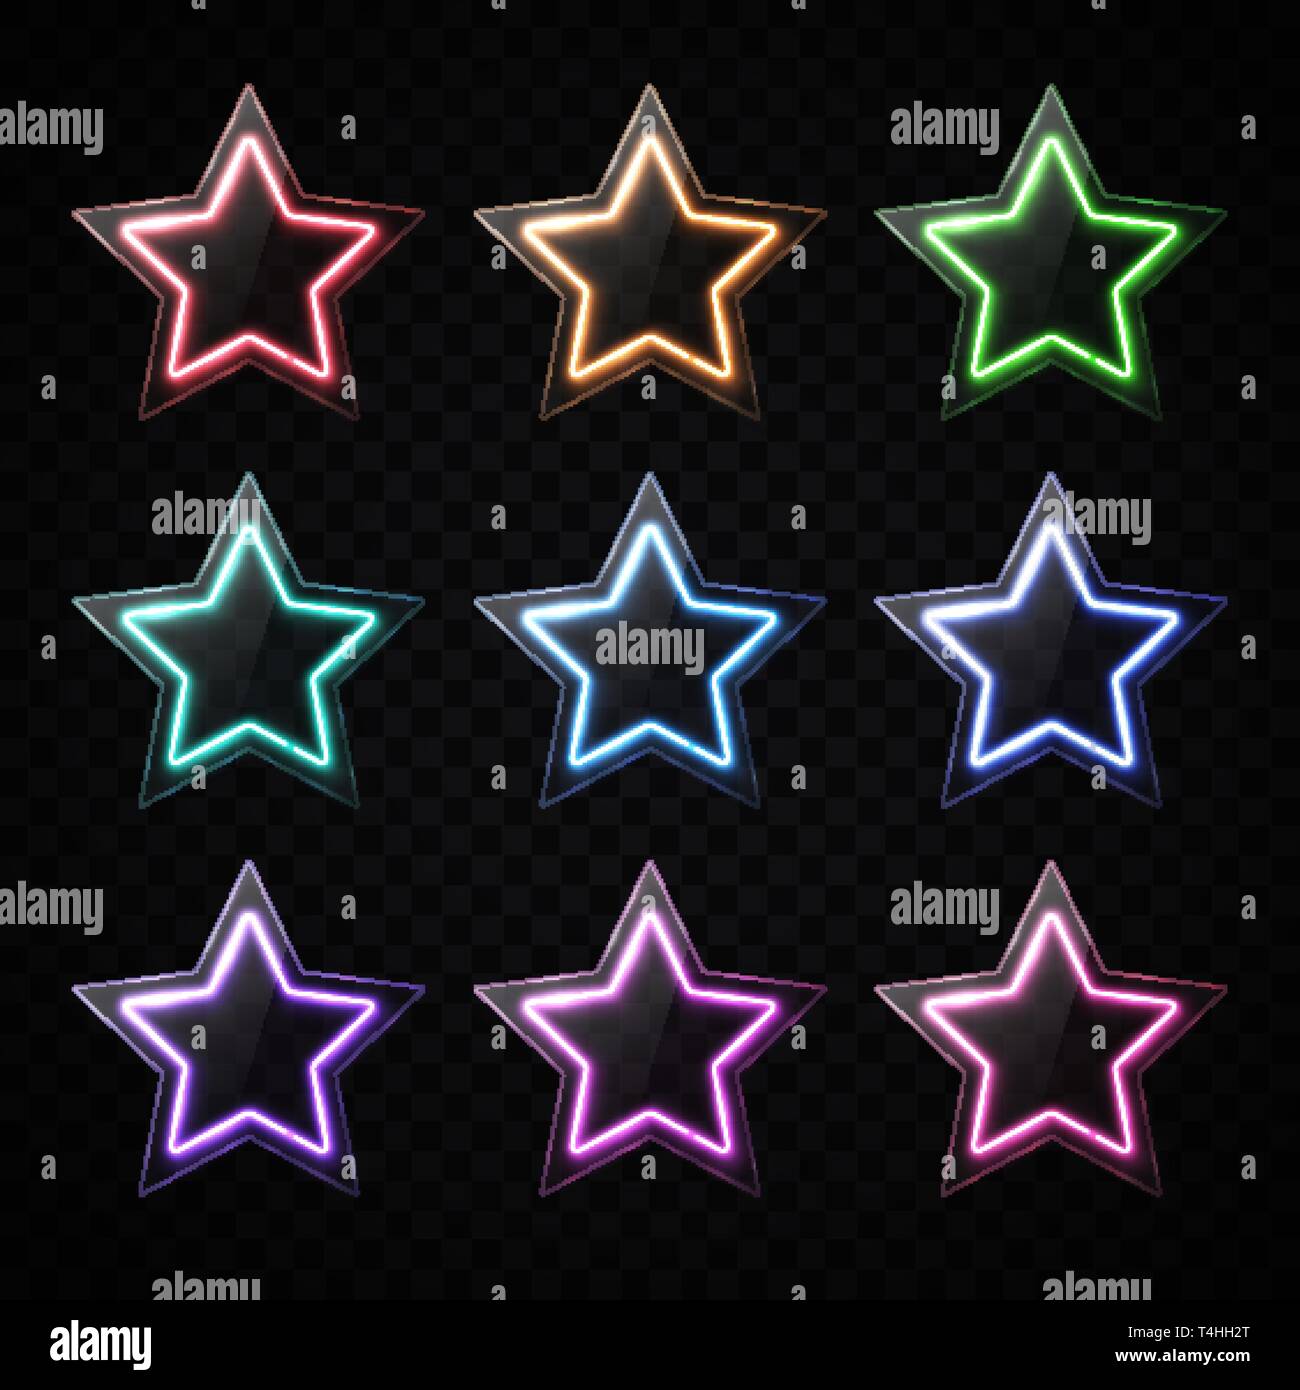 Color neon star shape banners set. Glowing led light stars with glass texture plate. Glossy infographics elements design Stock Vector